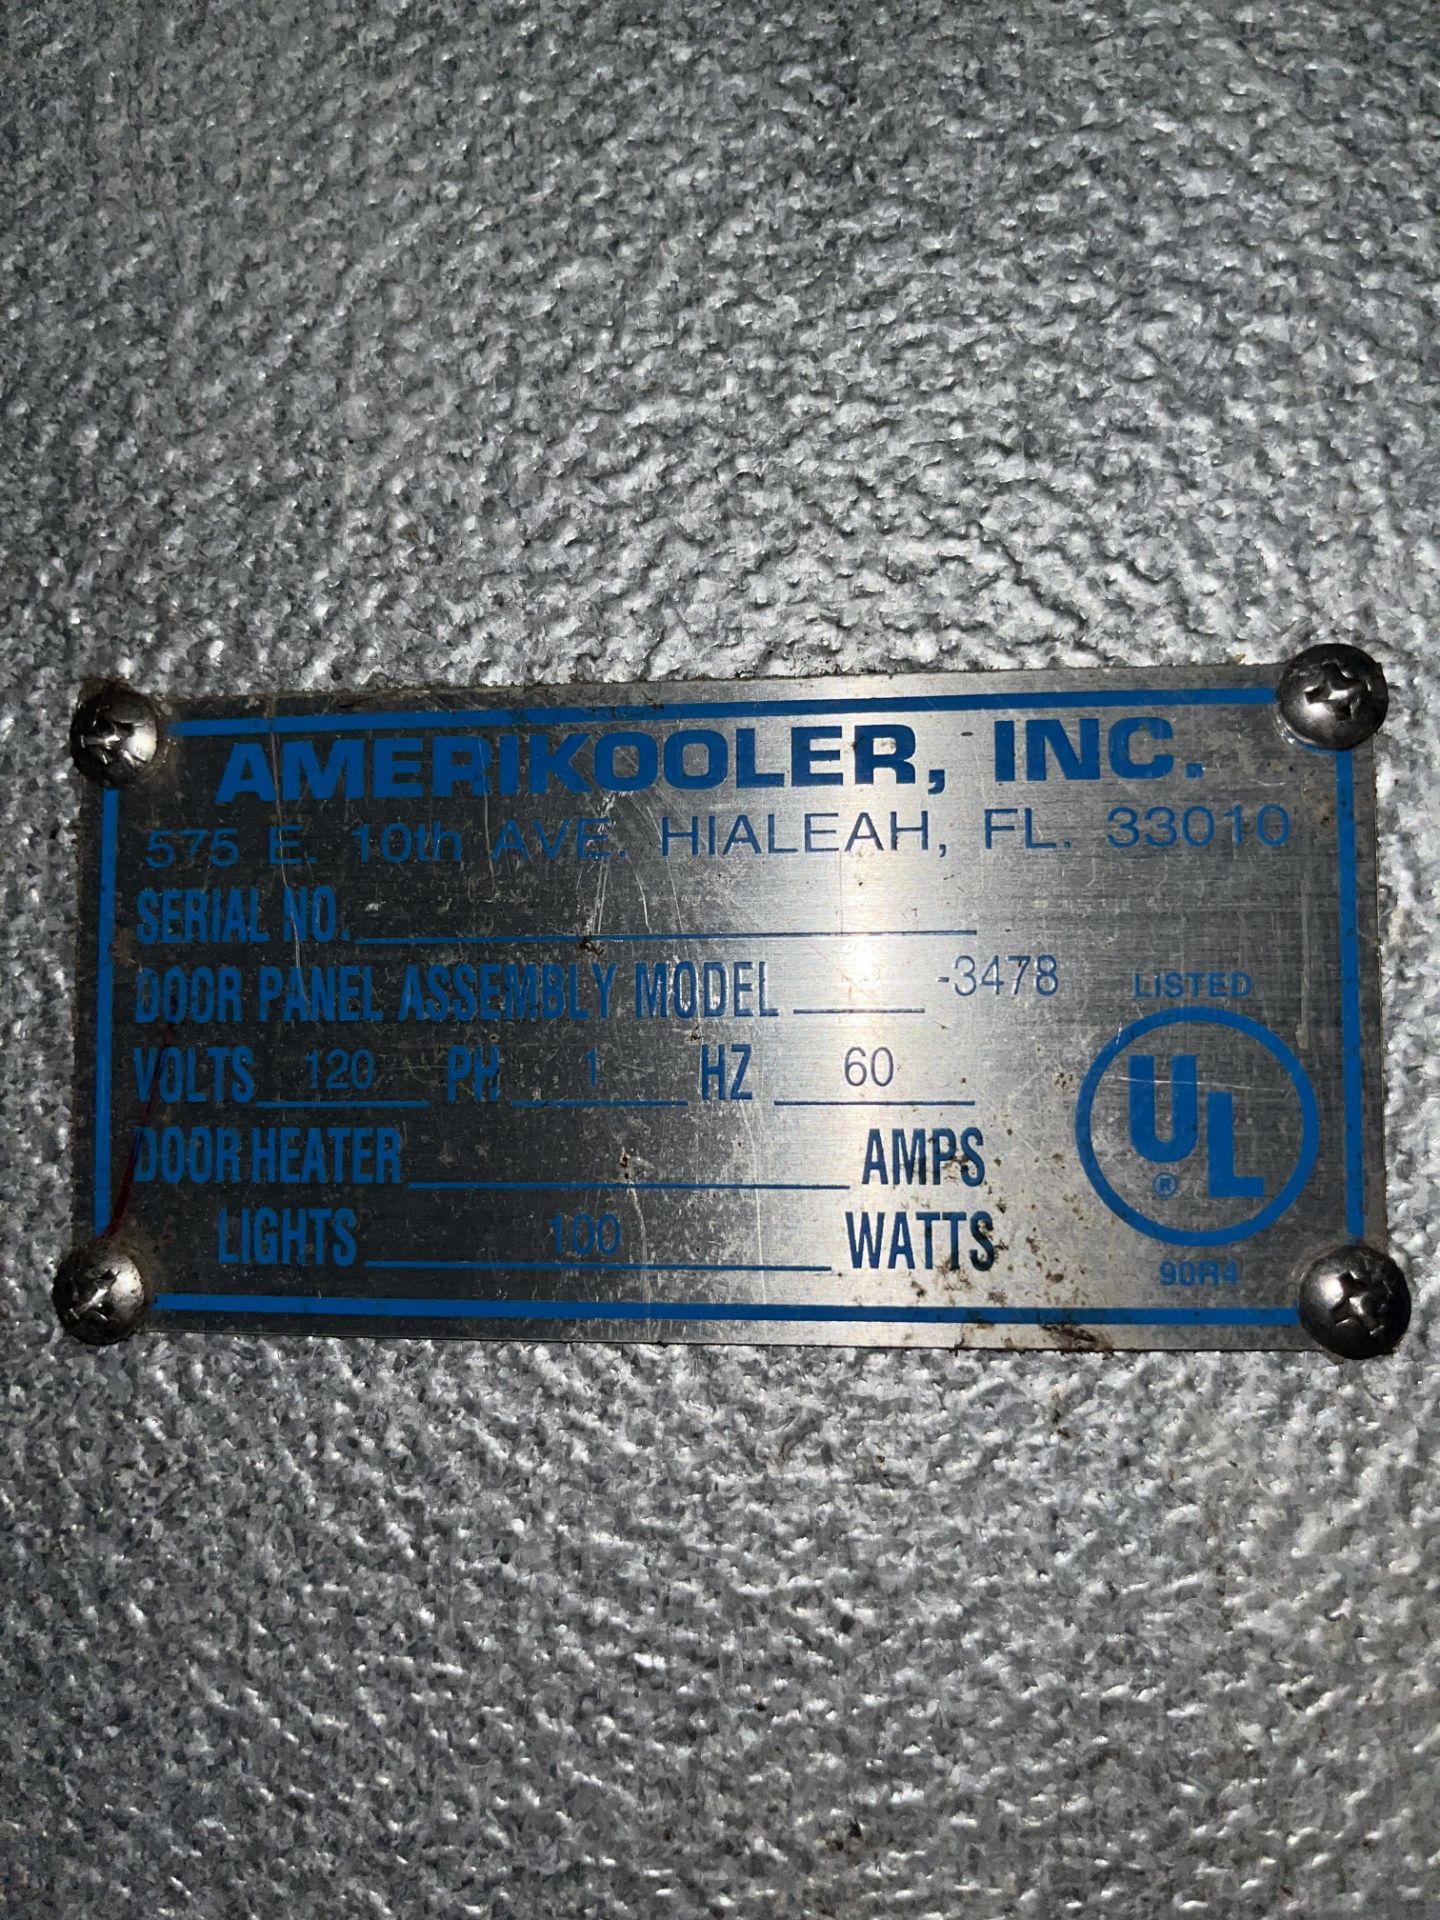 WALK IN AMERI KOOLER (INSIDE DIMS 7" 1" W 5" 2"L H 6"10 (Located Cleveland, OH) - Image 3 of 4